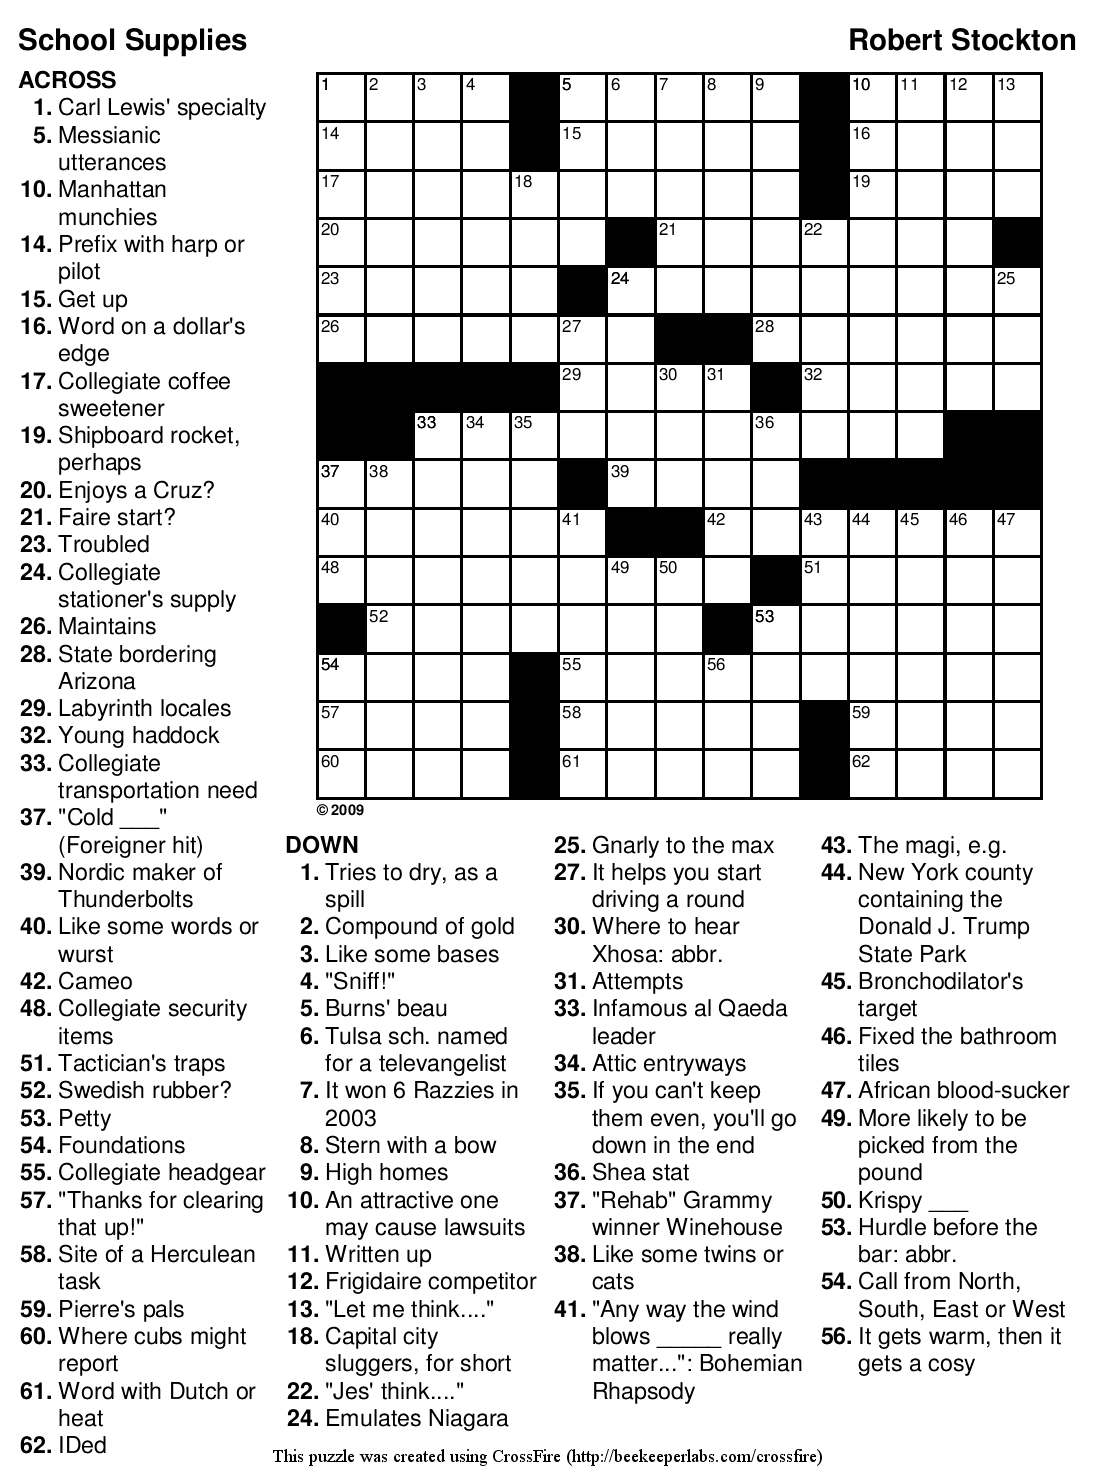 Easy Printable Crossword Puzzles | Crosswords Puzzles | Printable - Free Printable Crossword Puzzles Medium Difficulty With Answers